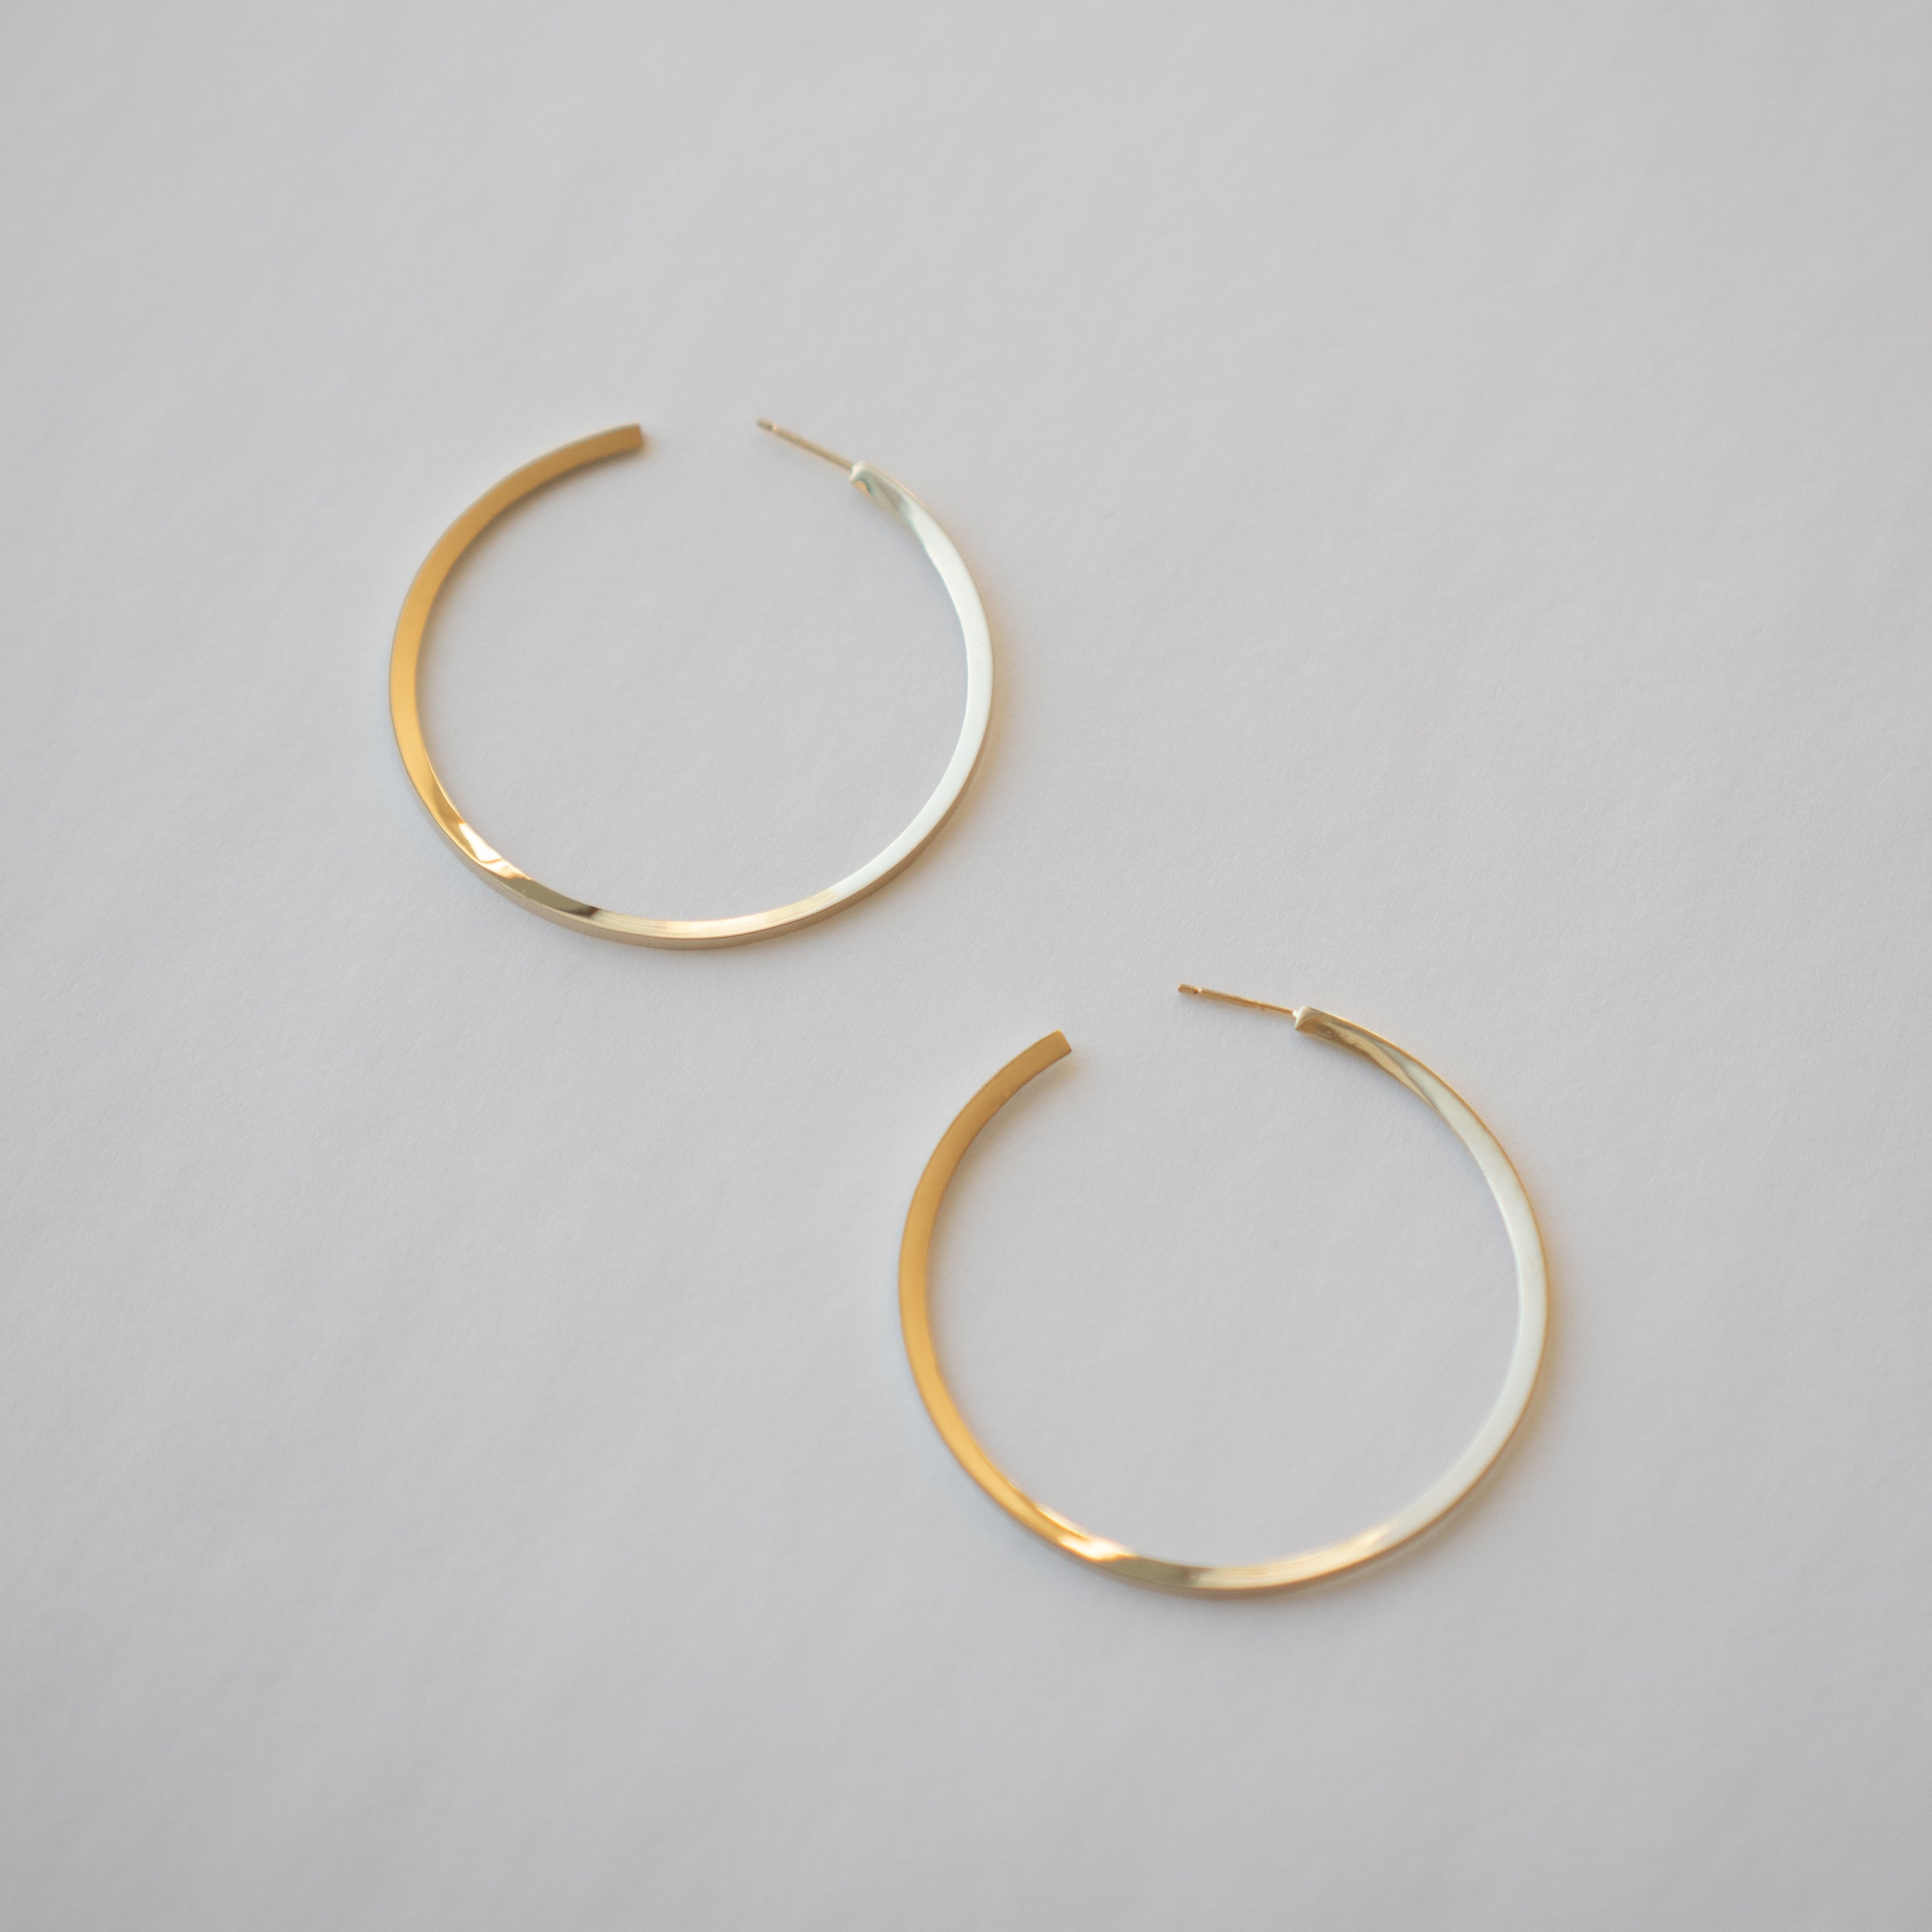 Designer Extra Large Kai Hoops in 14k karat recycled Yellow Gold by SHW Fine Jewelry made in NYC